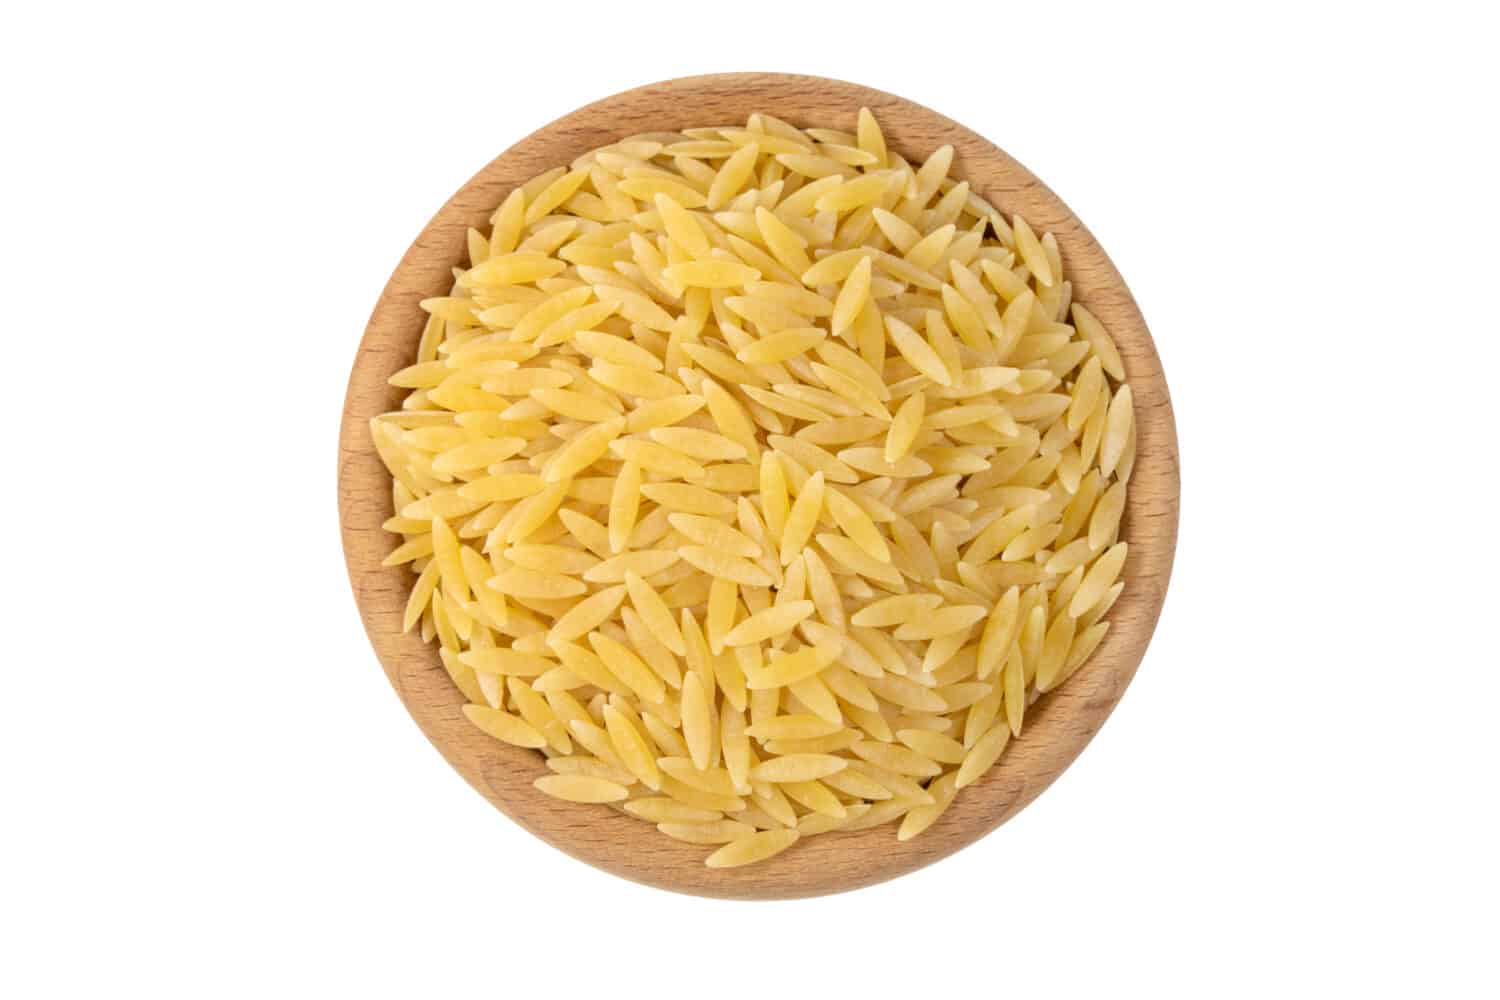  A close-up of Orzo, an Italian pasta shaped like a large grain of rice.